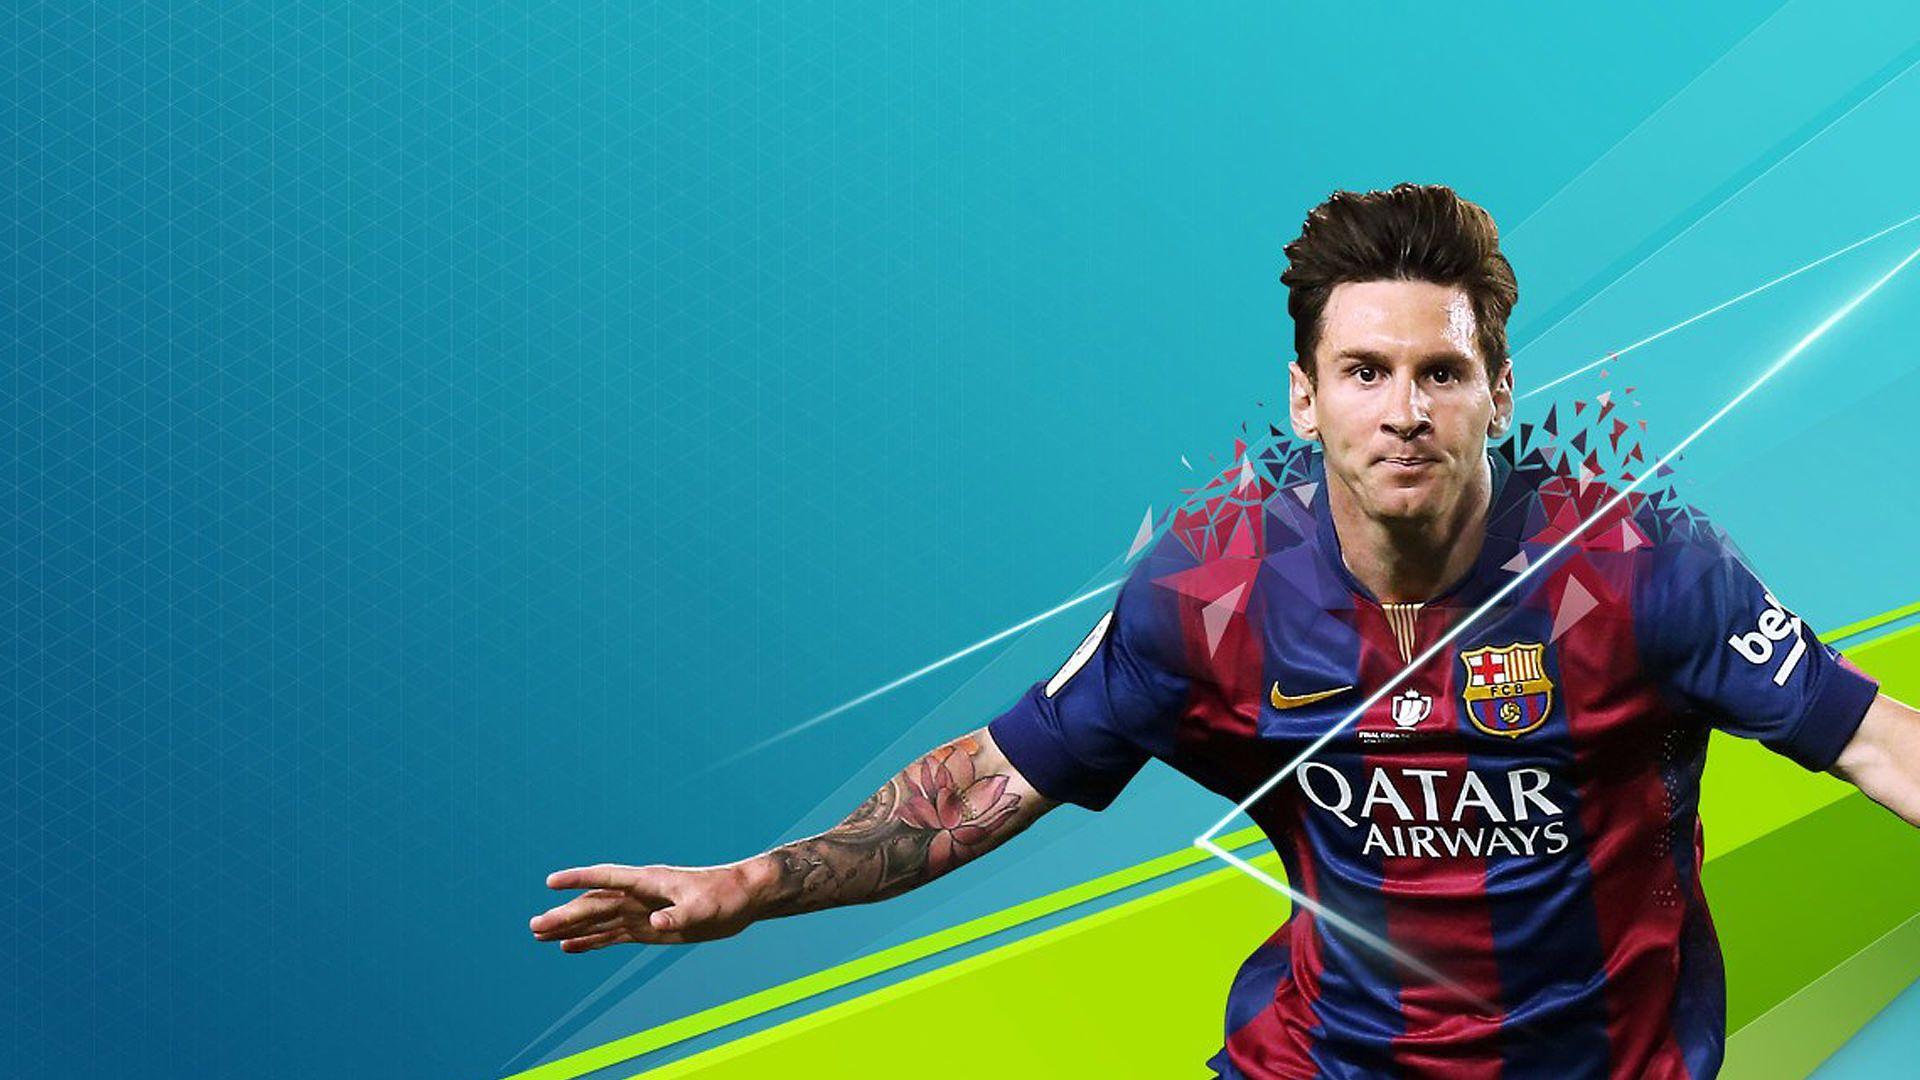 How to Play Champions League in FIFA 16 – FIFPlay